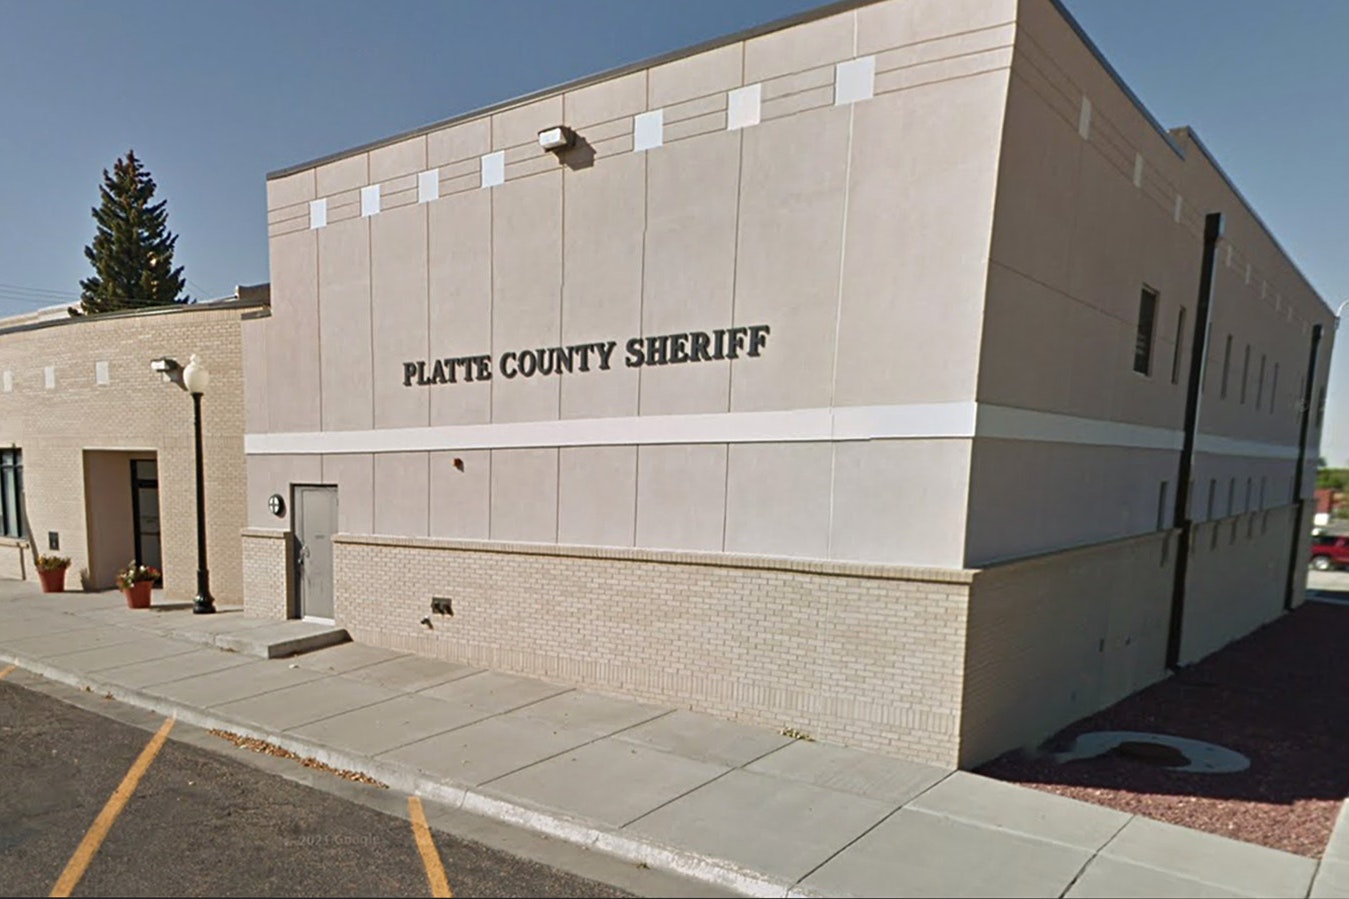 The Platte County Sheriff's Office and jail in Wheatland, Wyoming.